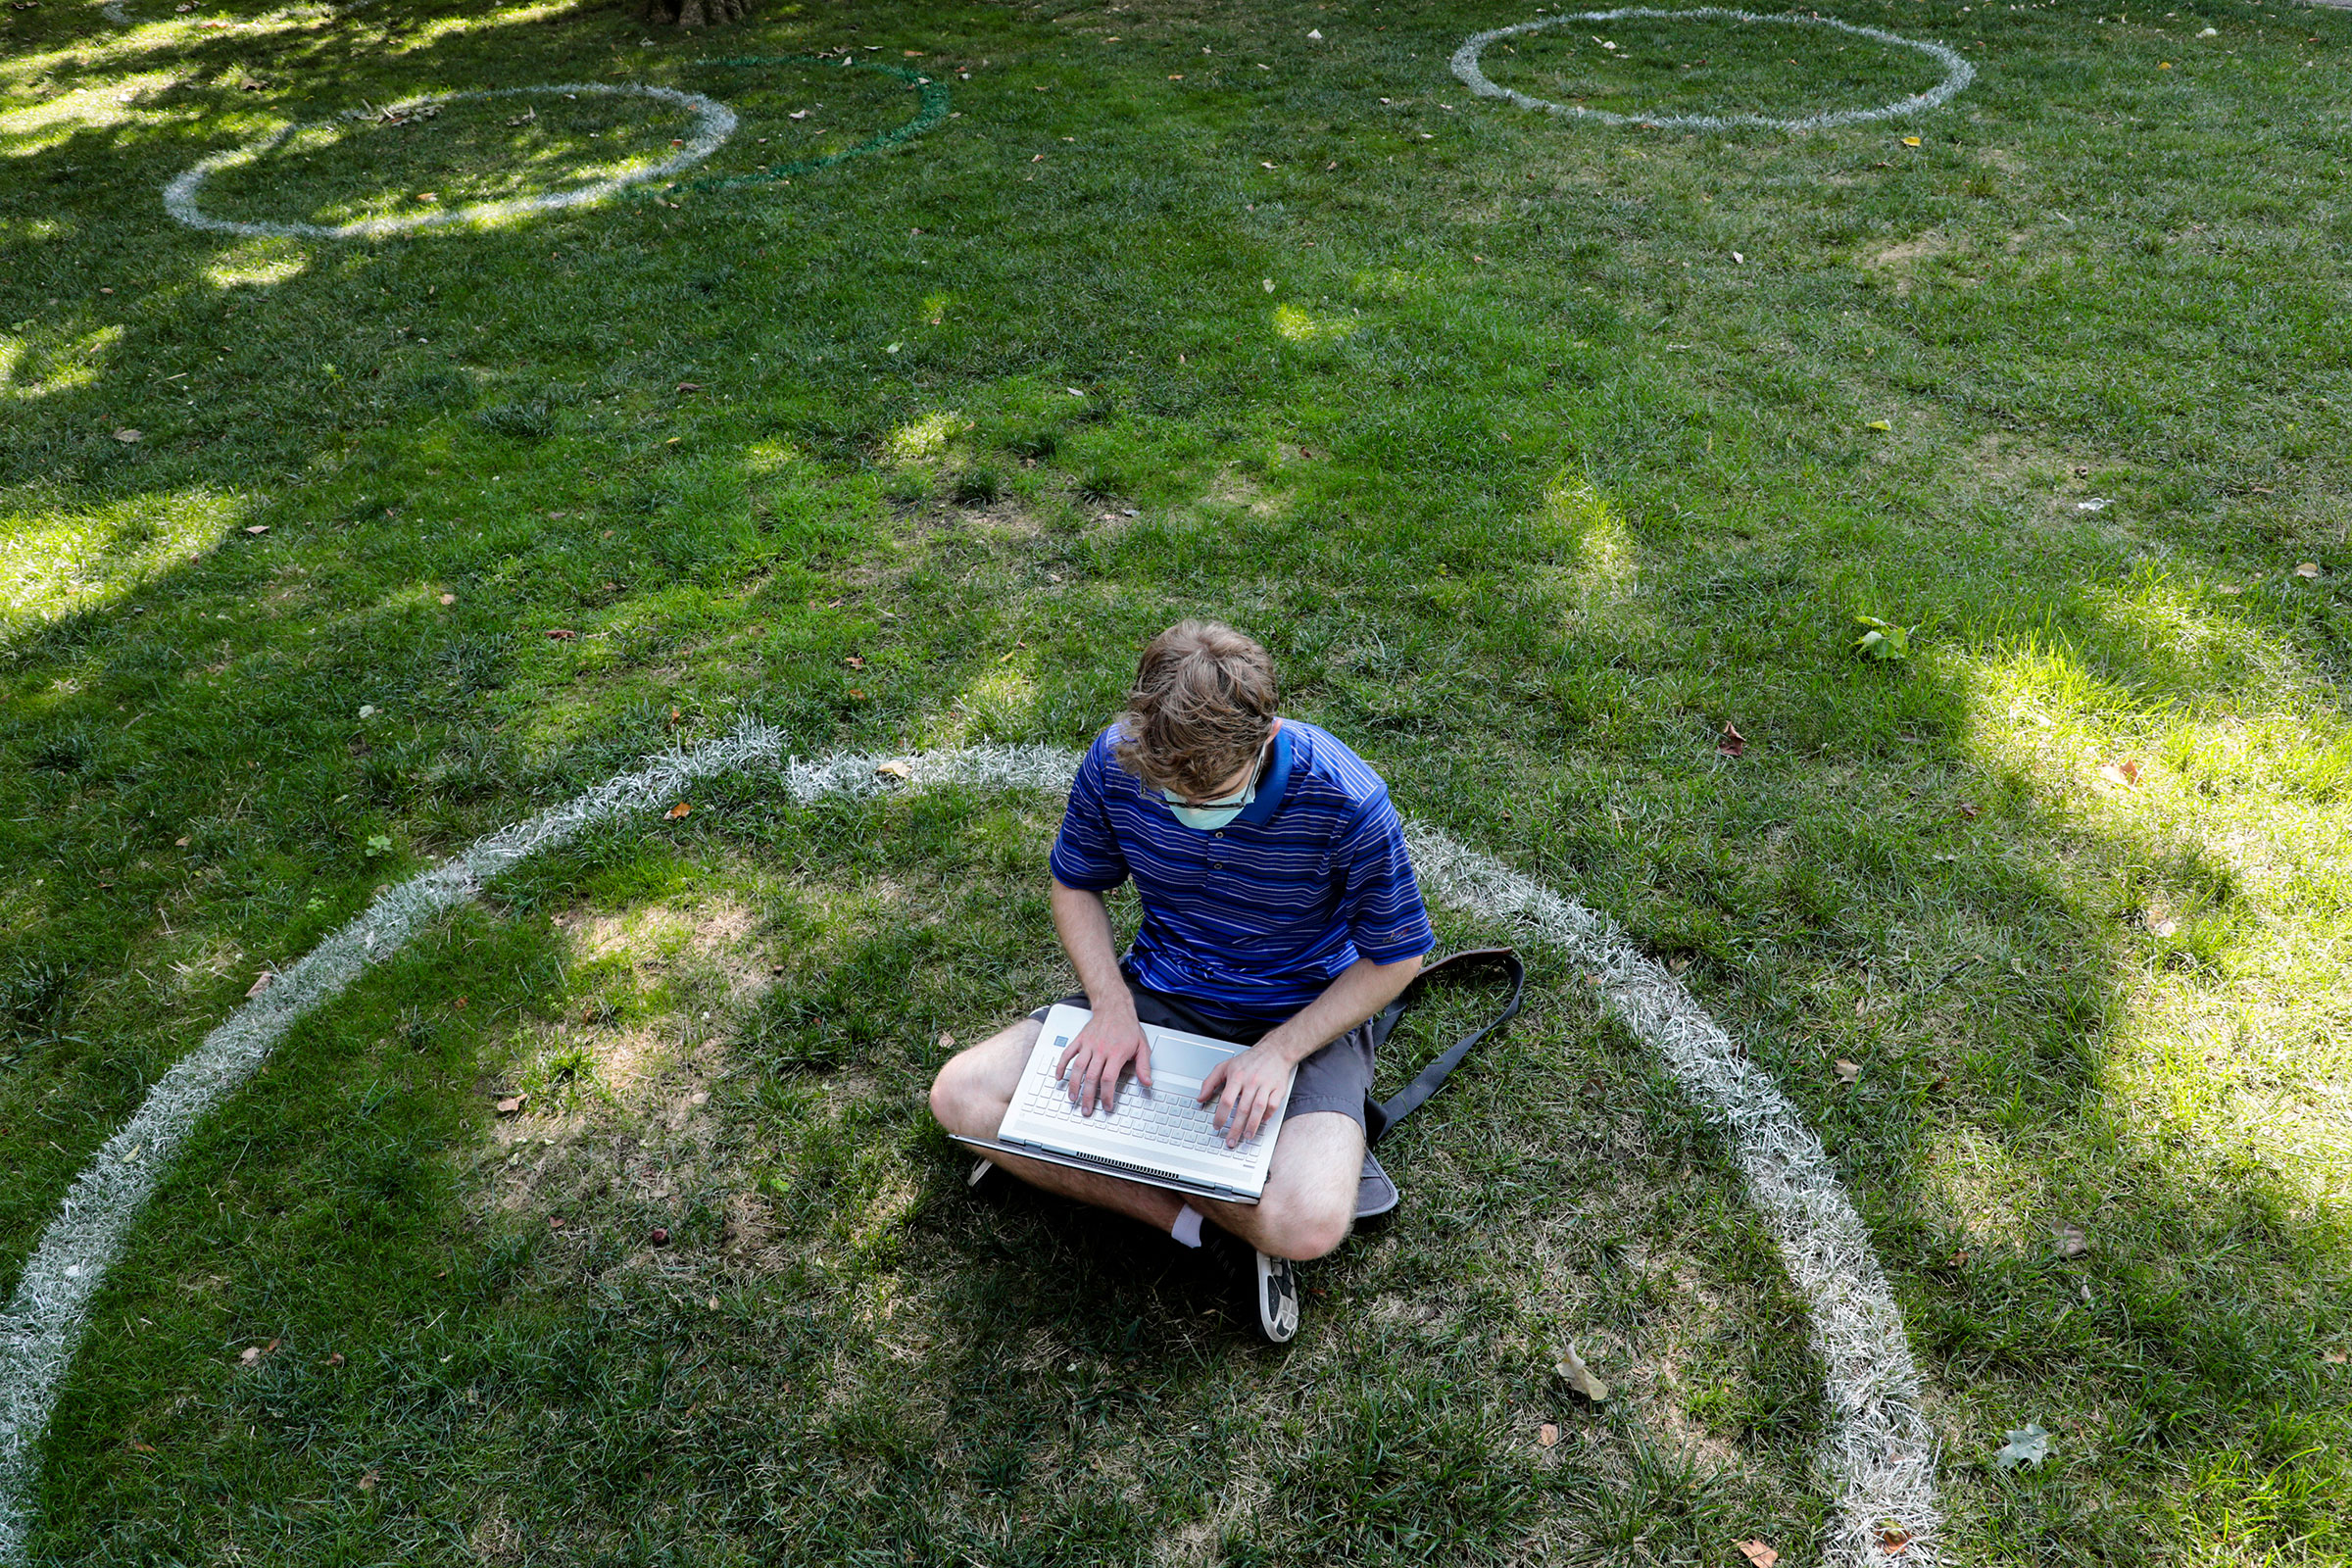 Logan Armstrong, a Cincinnati junior, works while sitting inside a painted circle on the lawn of the Oval during the first day of fall classes on at Ohio State University